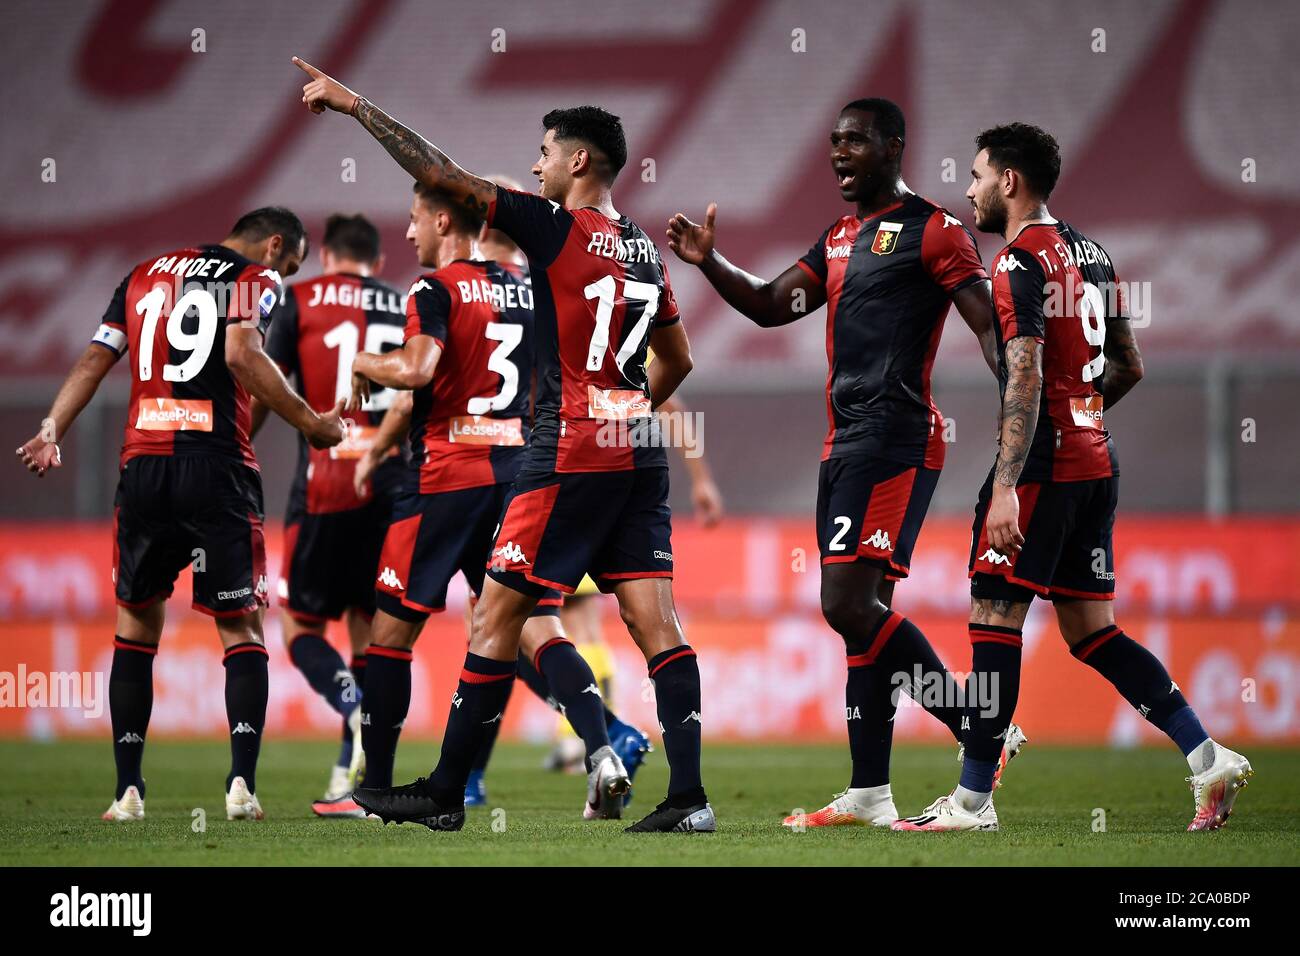 Genoa, Italy - 02 August, 2020: Cristian Romero (C) of Genoa CFC celebrates after scoring a goal during the Serie A football match between Genoa CFC and Hellas Verona. Genoa CFC won 3-0 over Hellas Verona. Credit: Nicolò Campo/Alamy Live News Stock Photo